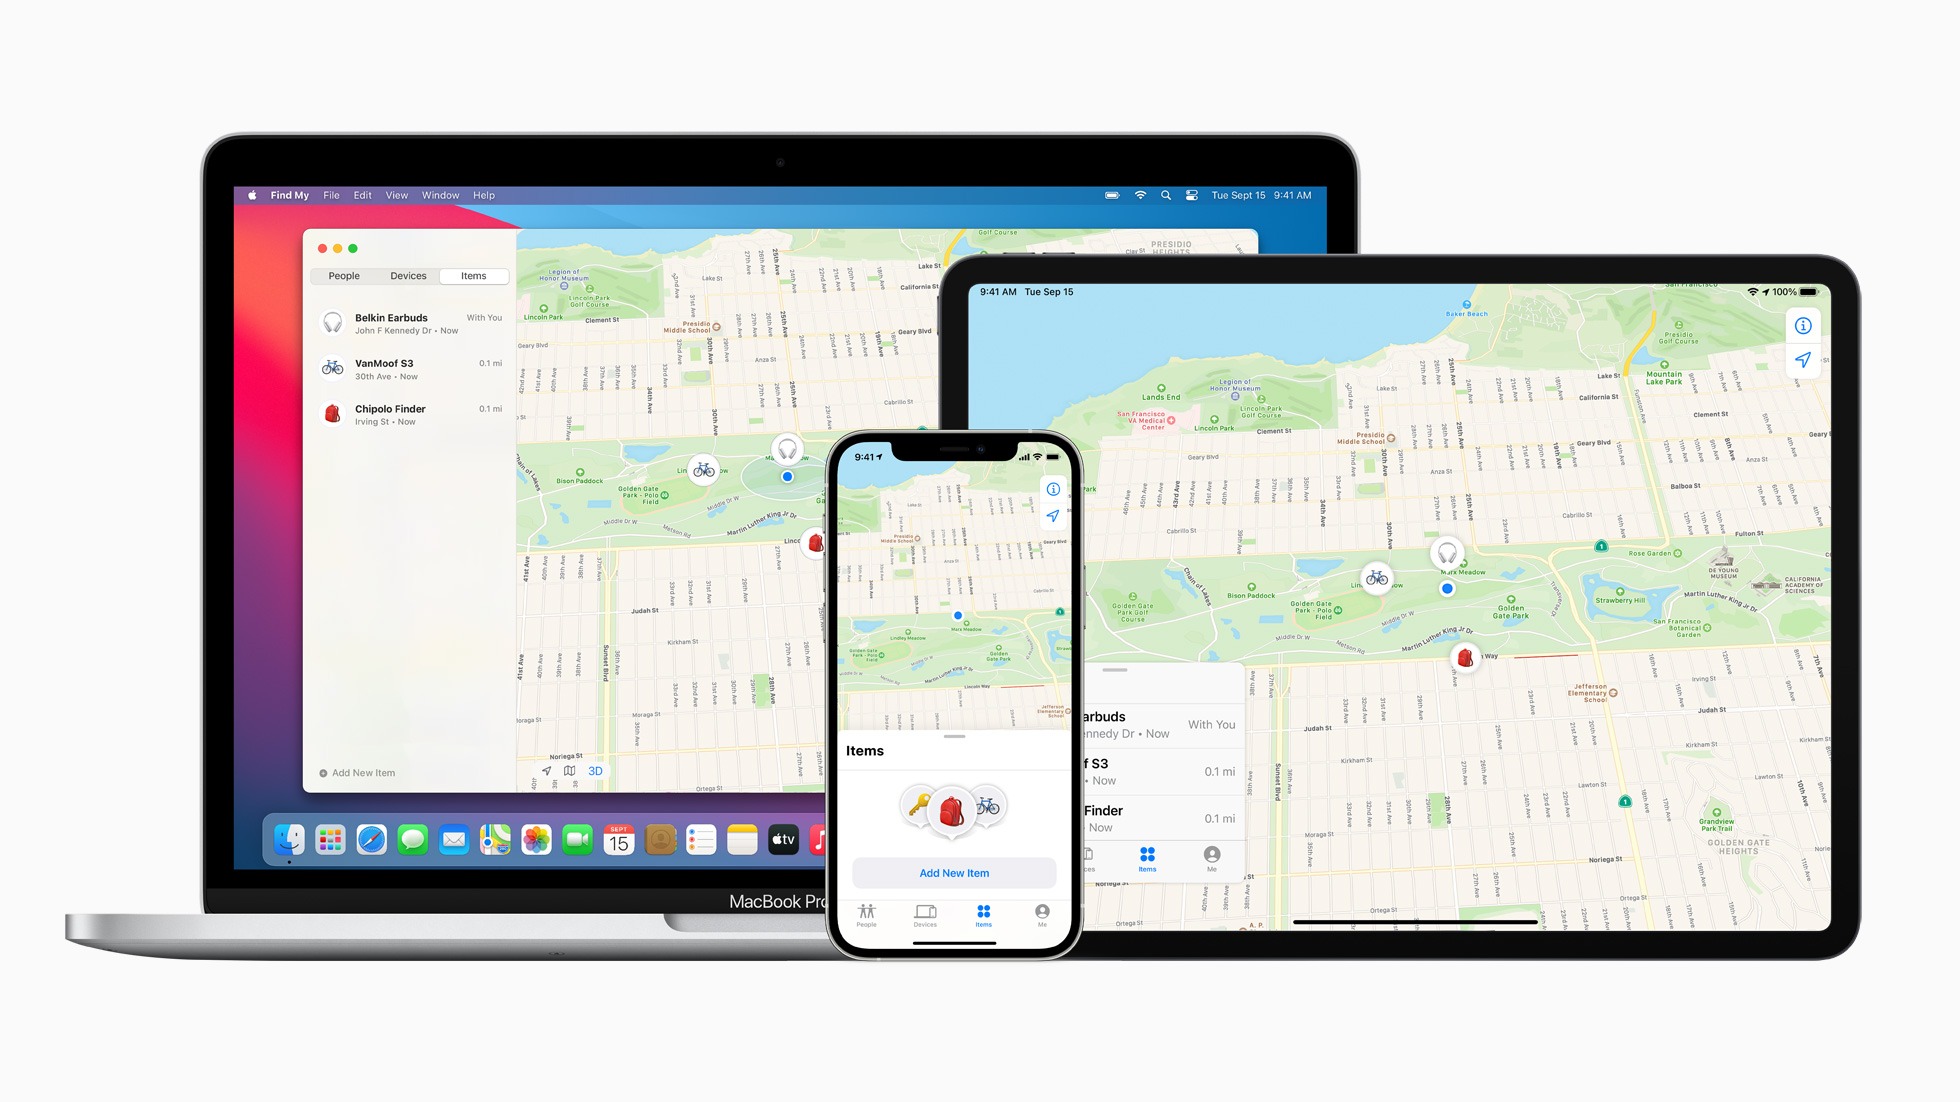 Apple find my network now offers